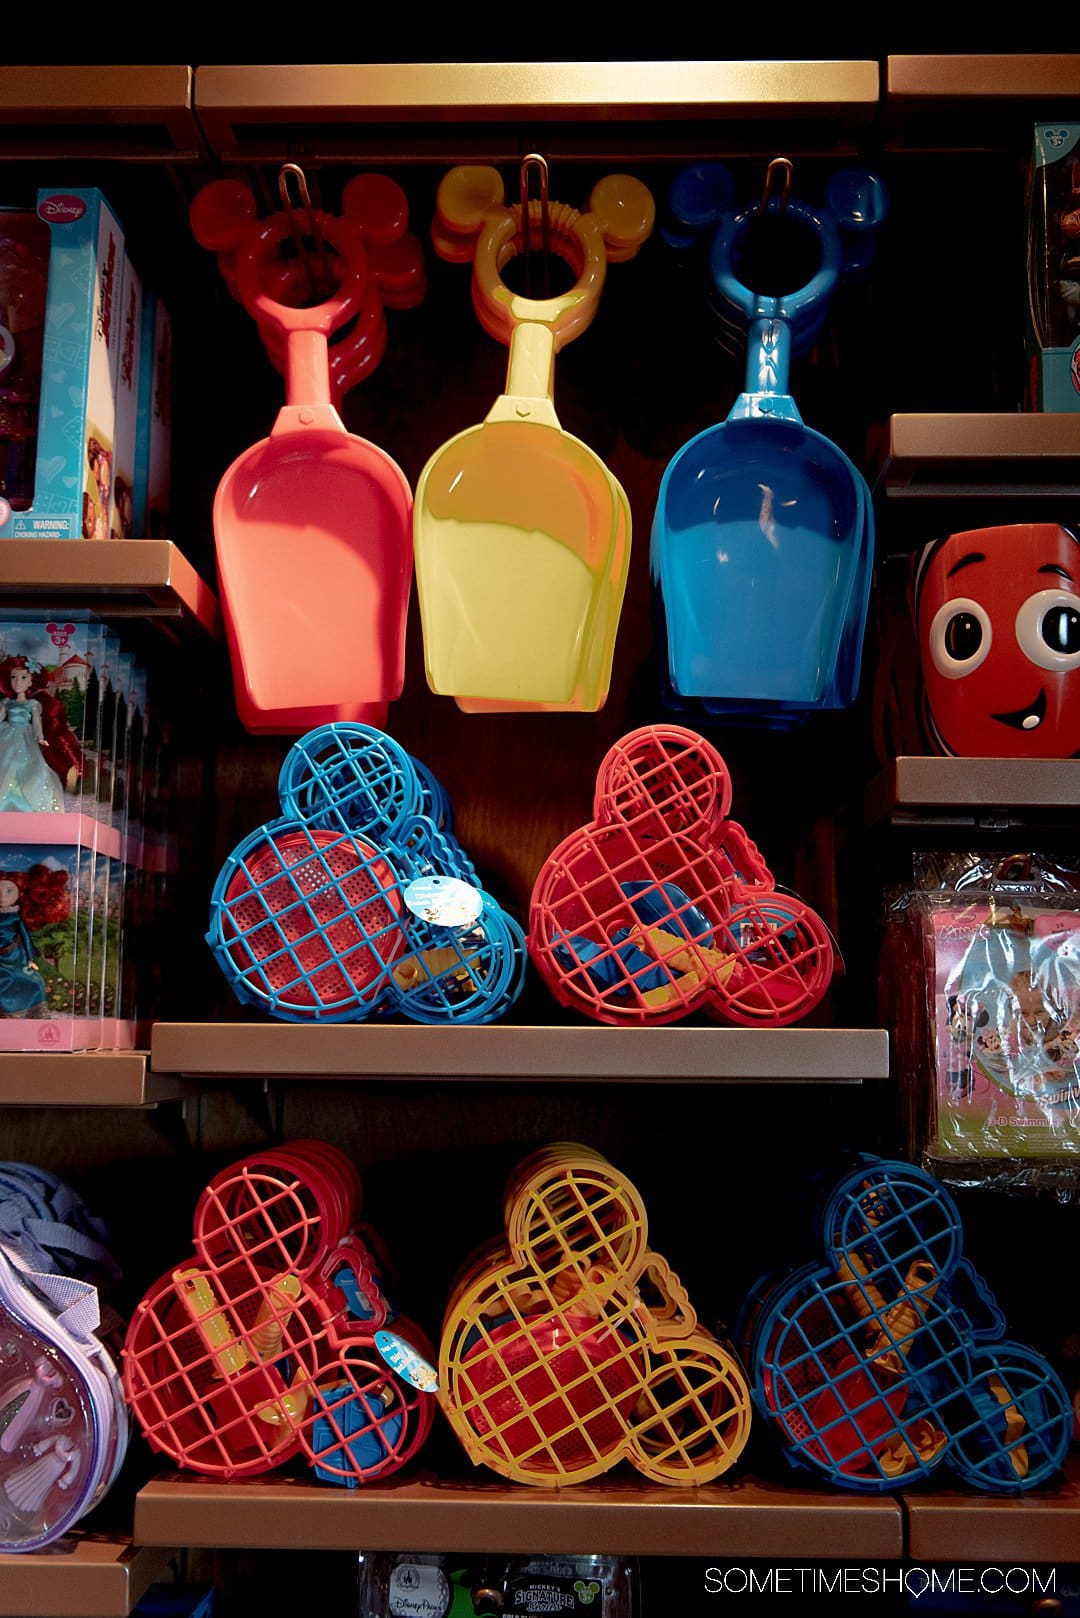 Sand toys on a shelf with Disney motifs and Mickey Mouse, in red, yellow and blue.